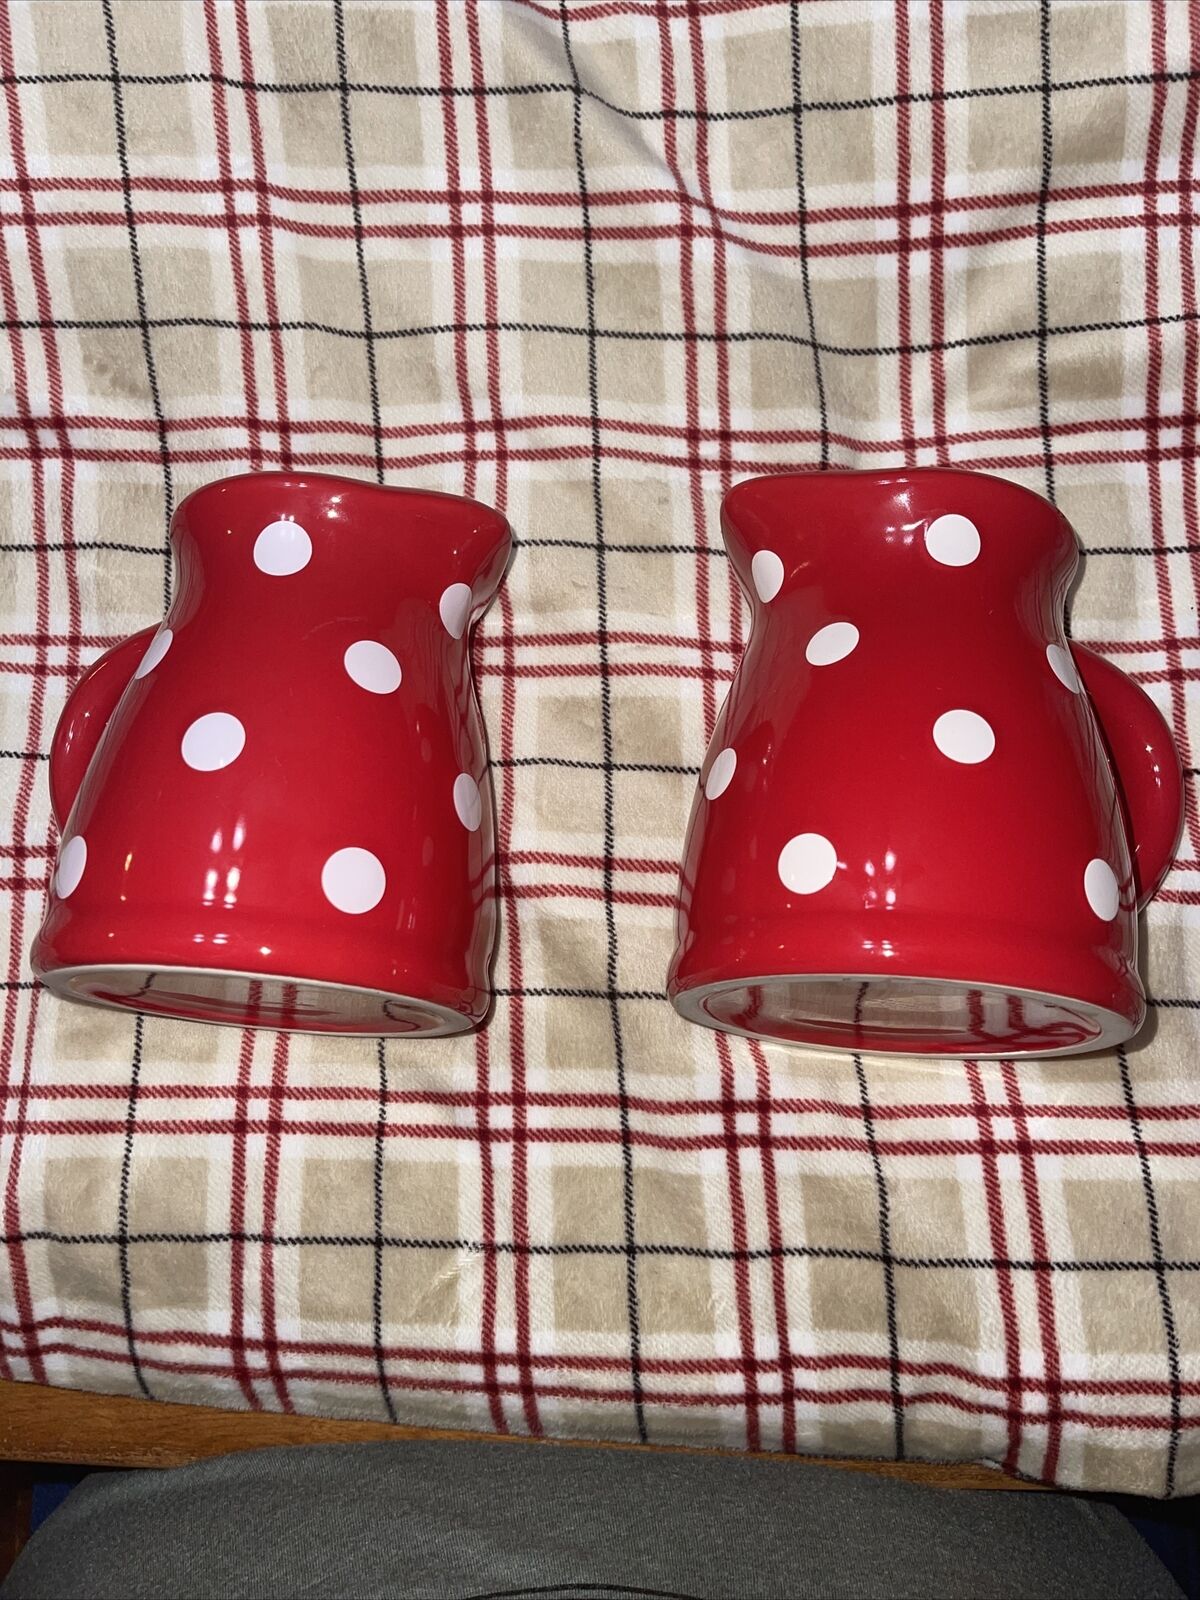 2 Terramoto Ceramic Red and White with Pitchers I Discount is also underway New products world's highest quality popular Polka-dot